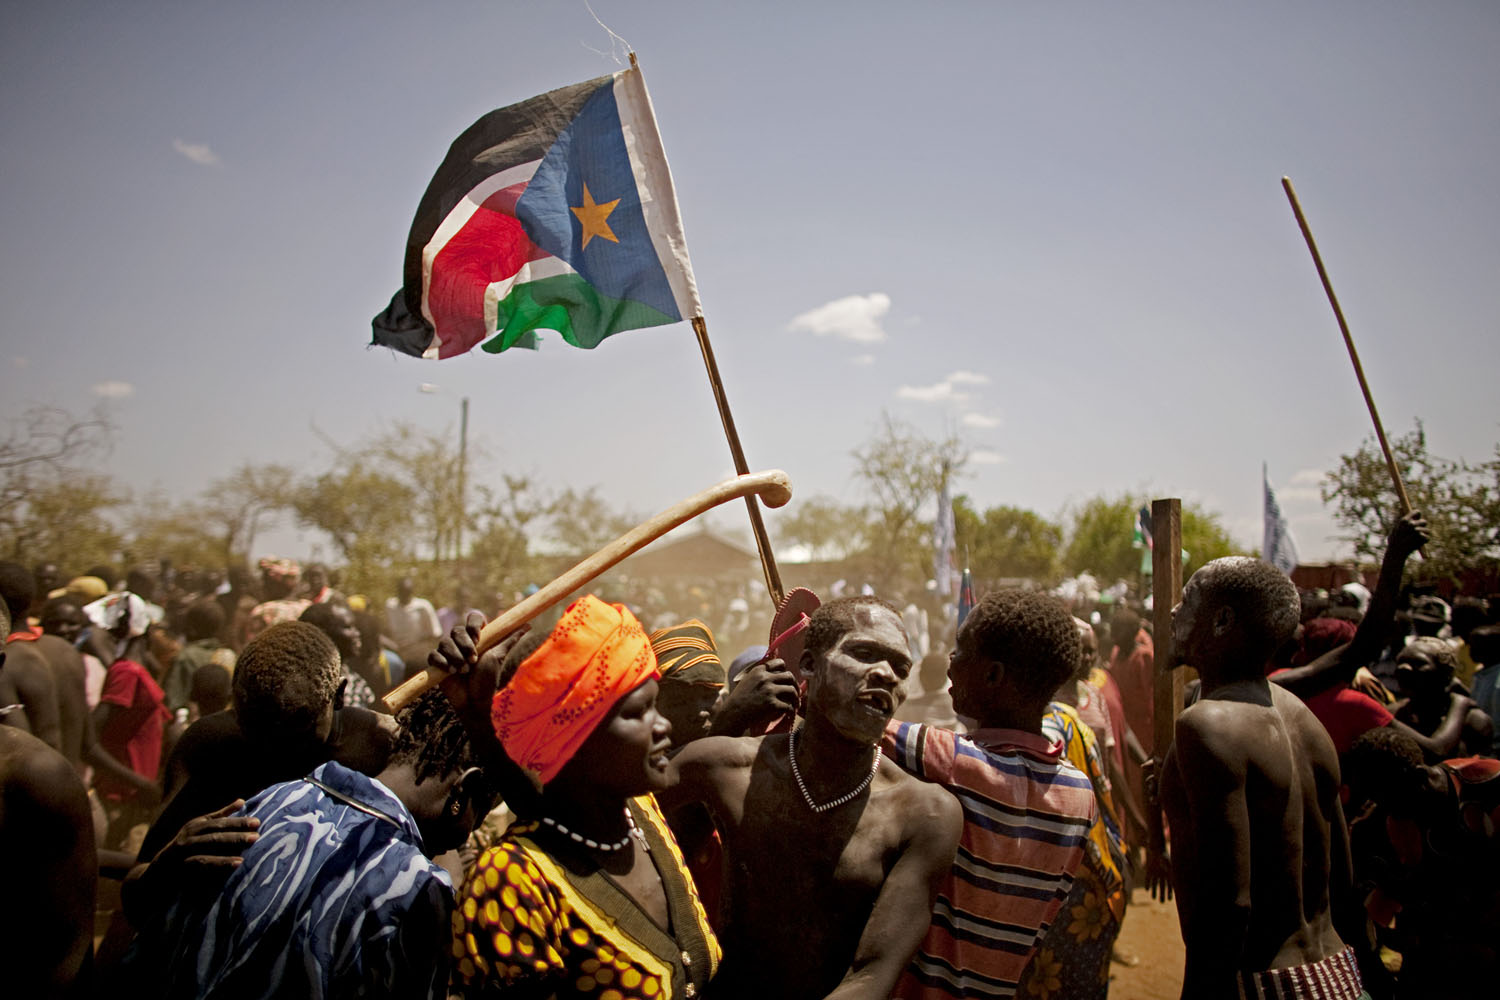 February 4, 2011. Southern Sudanese from the pastoralist Taposa tribe take part in a nationalist celebration in the remote area of Kapoeta. Support for southern independence was strong even among groups in the most desolate areas.